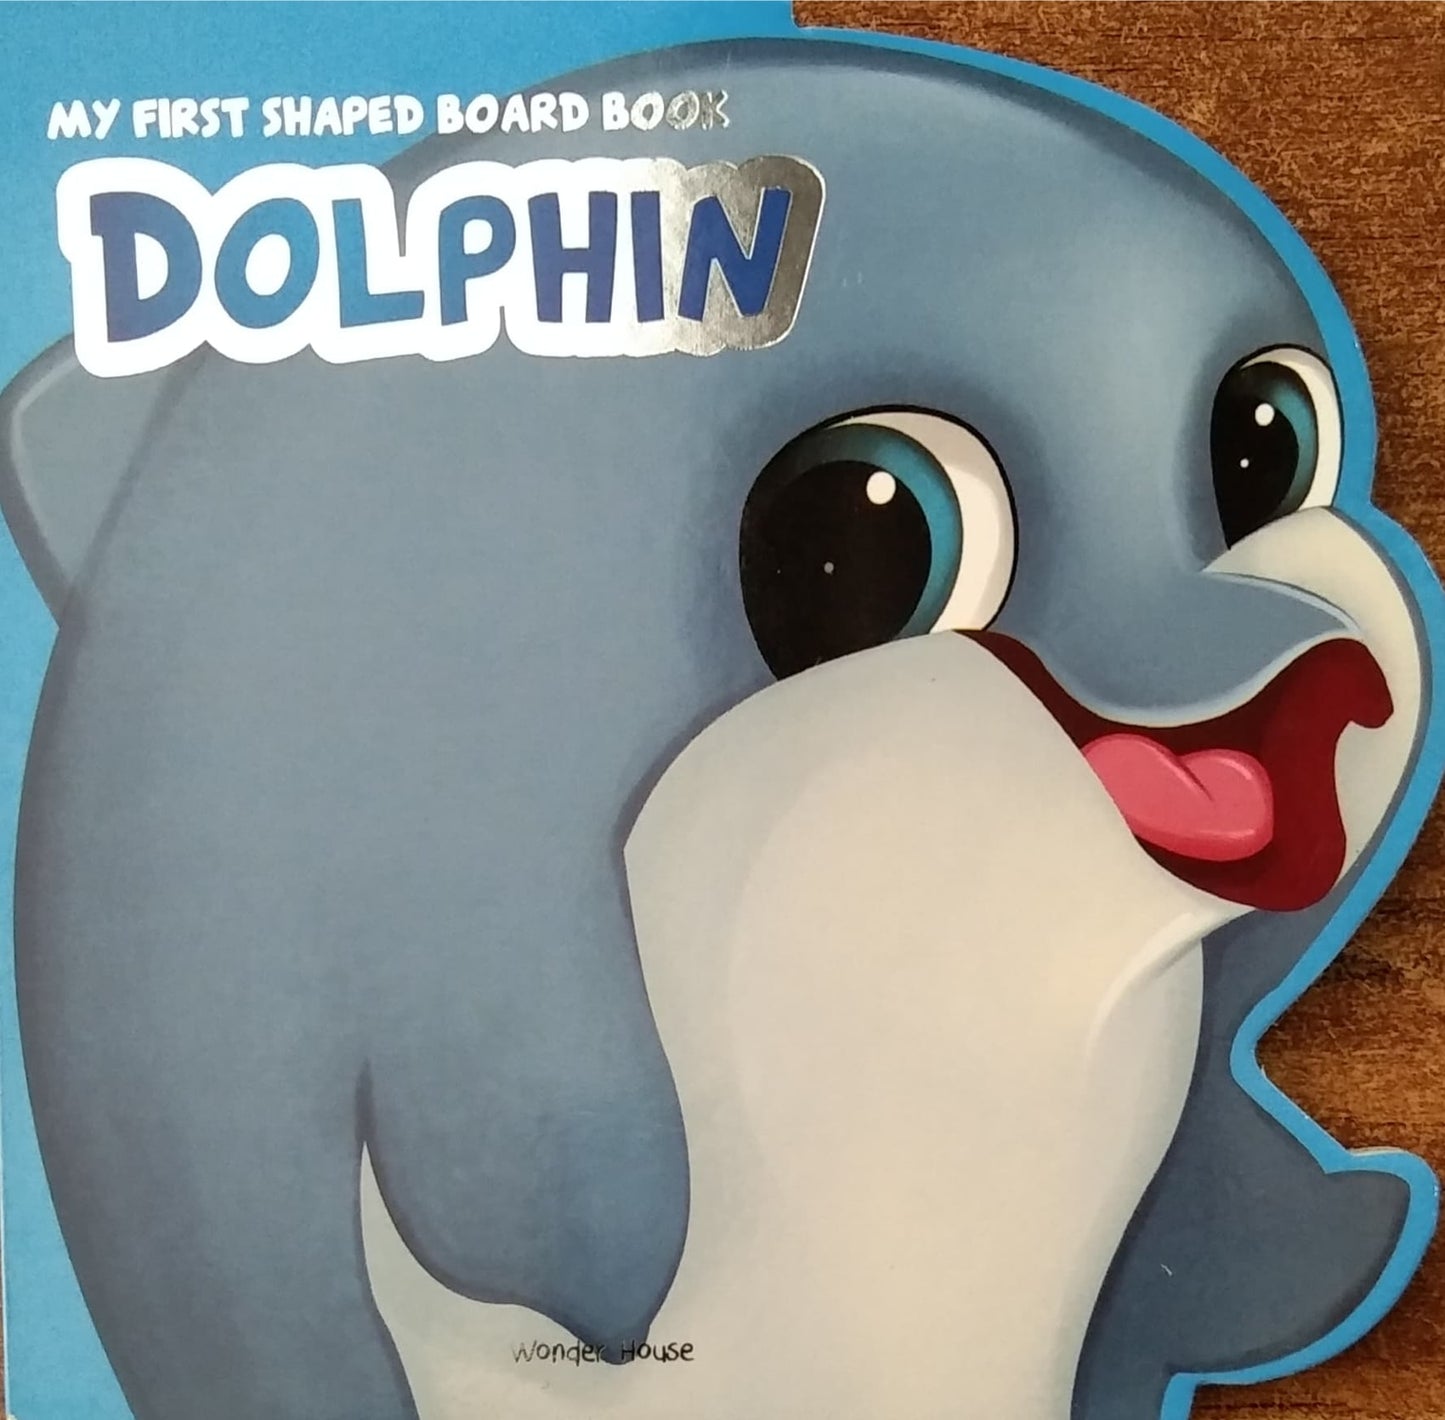 My first shaped board book - Dolphin